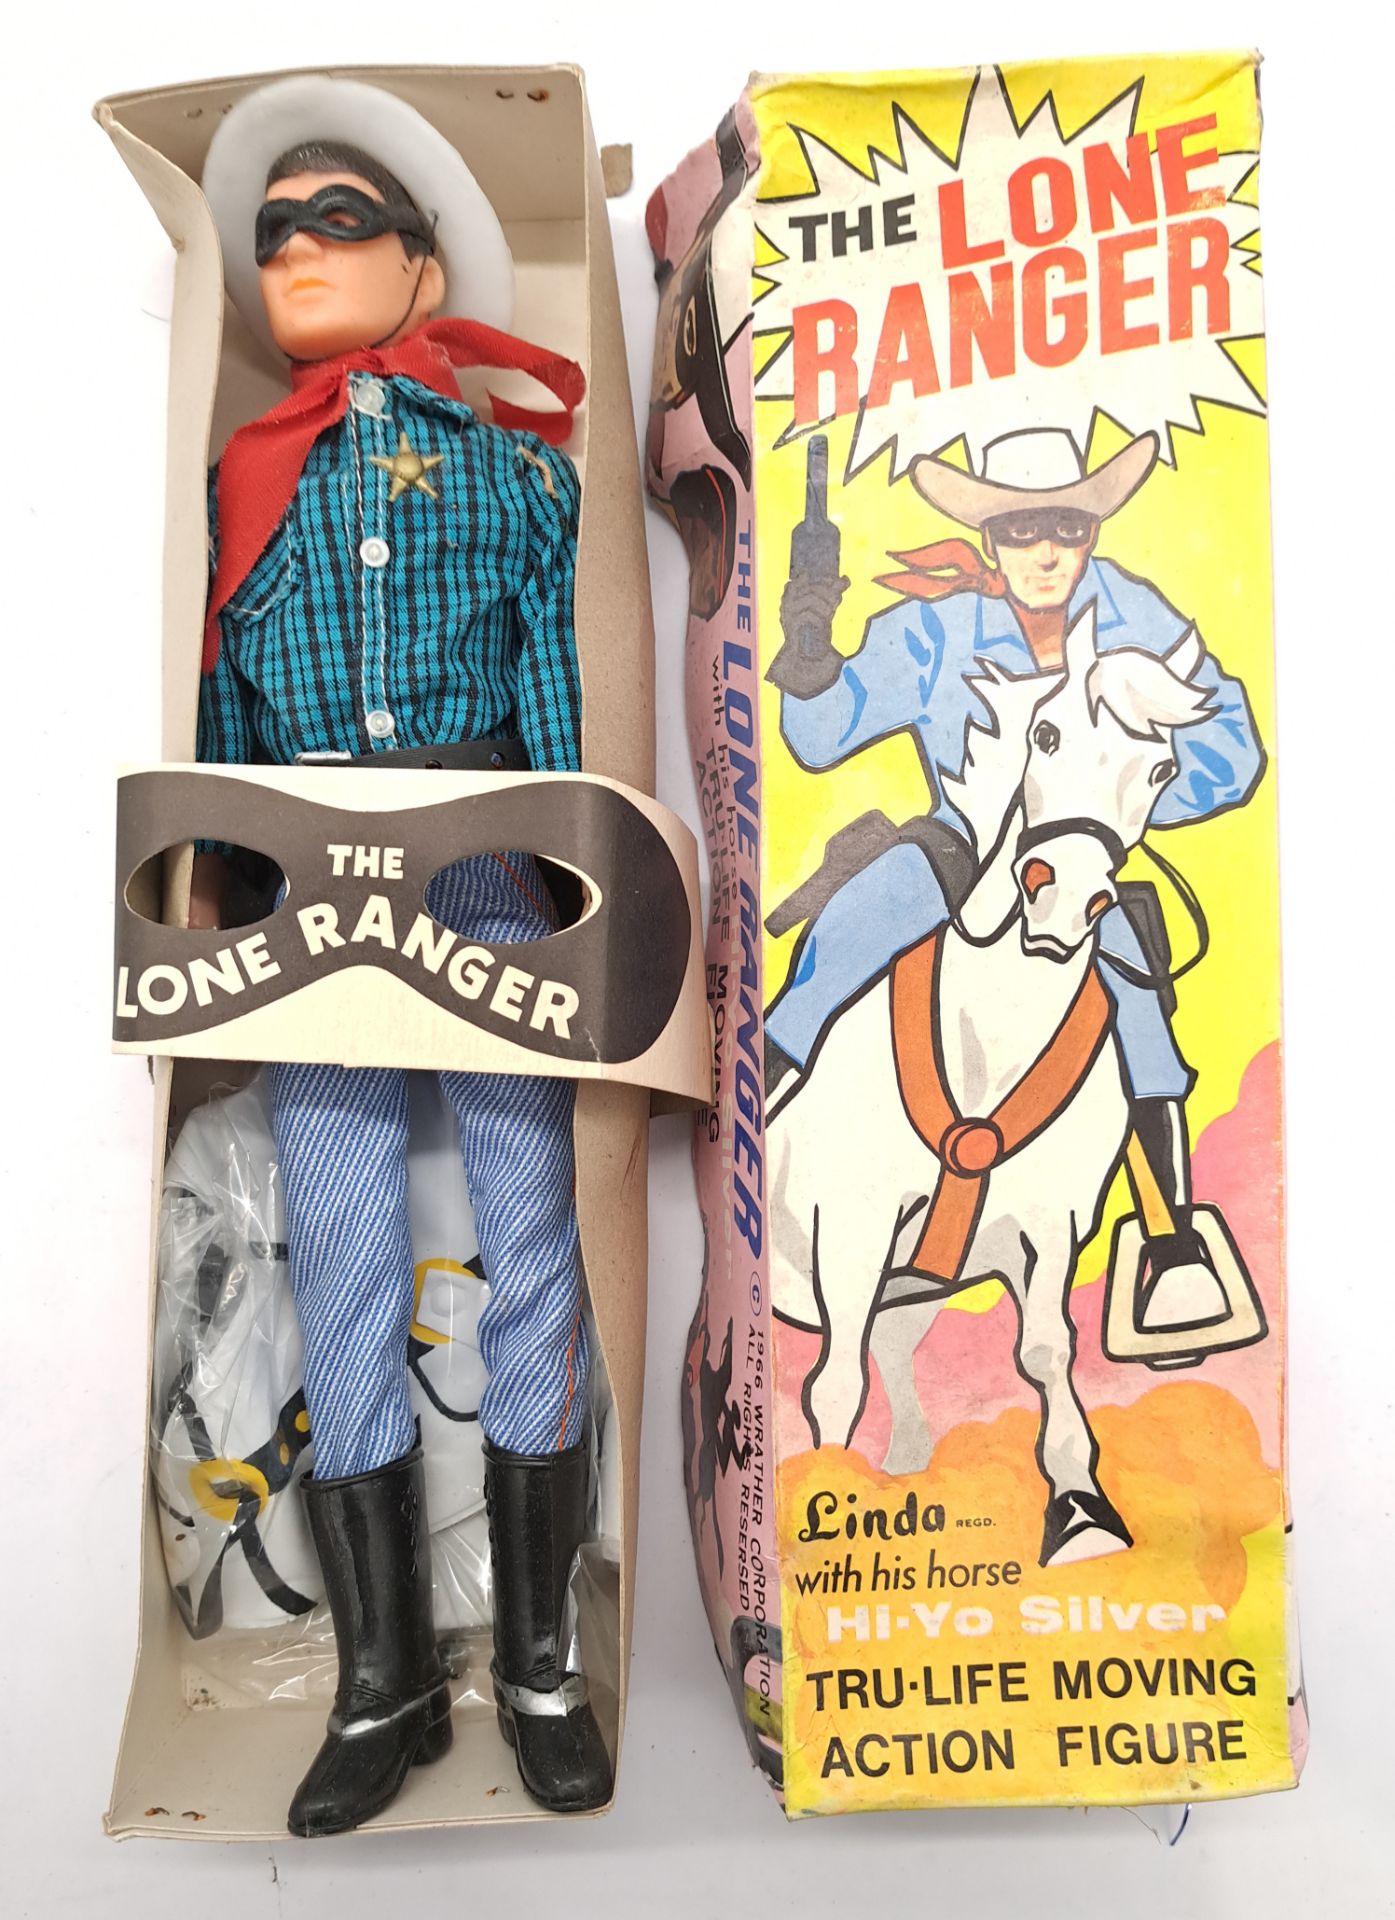 Linda Toy The Lone Ranger 12 Inch Action Figure X2 - Image 3 of 3